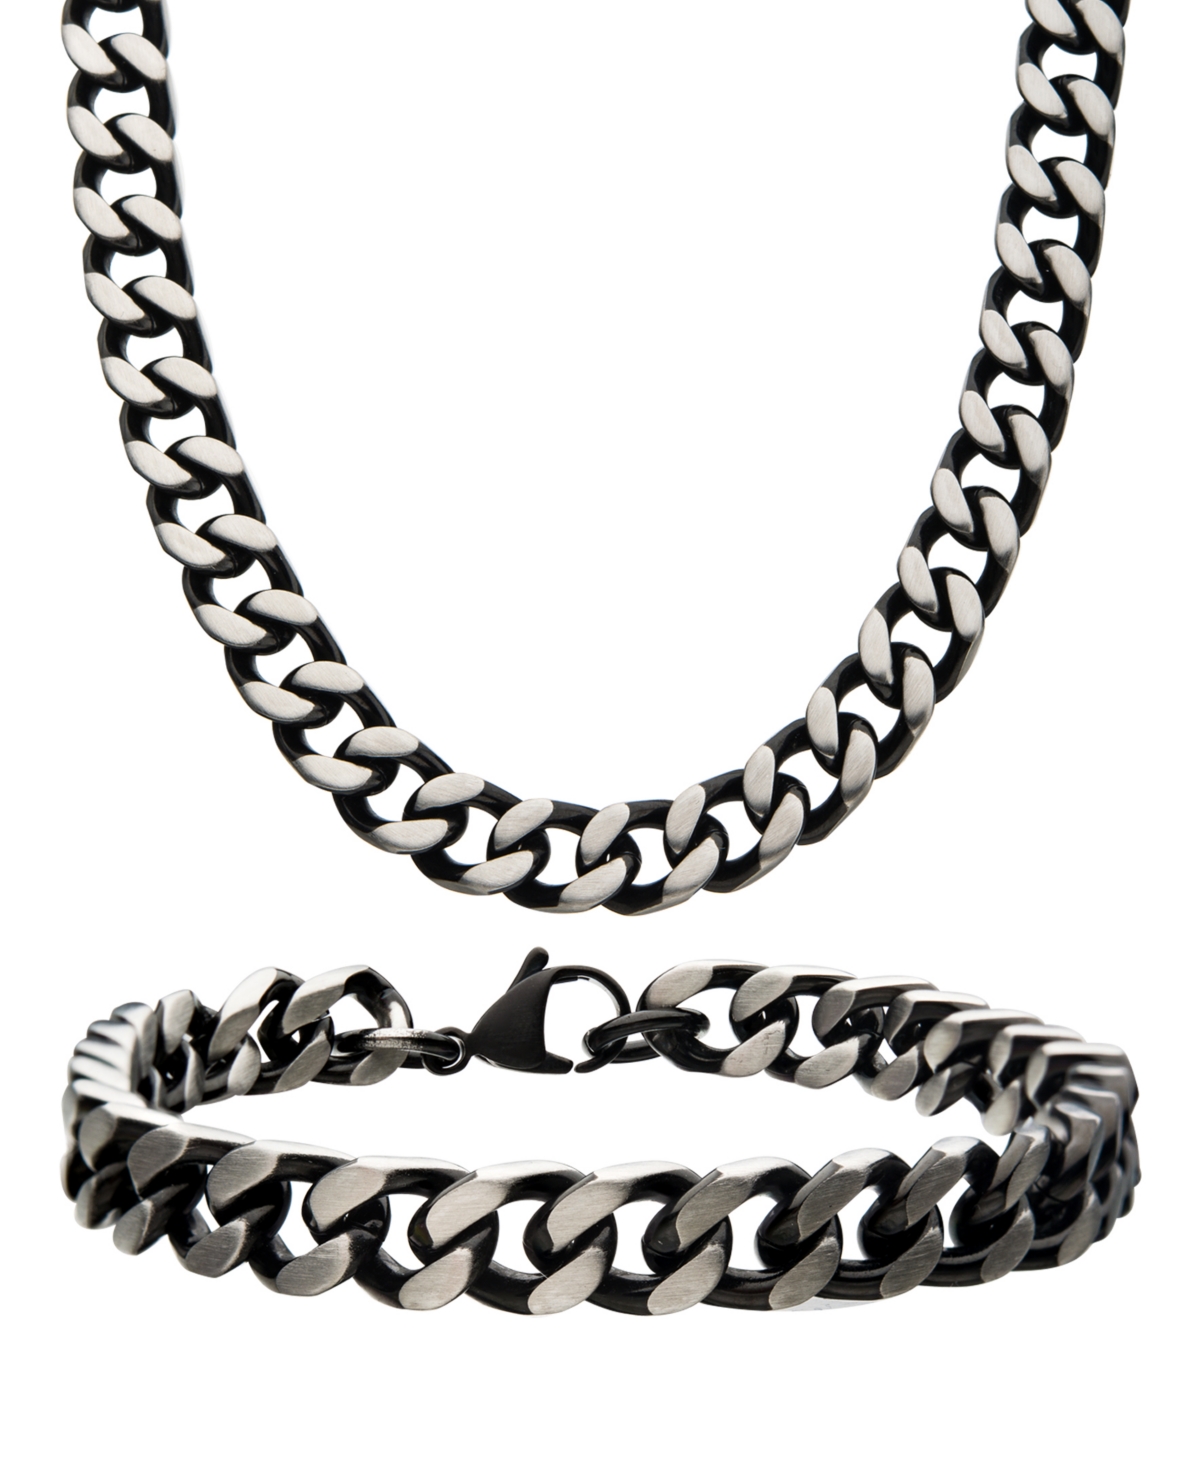 Curb Chain 8" Bracelet and 22" Necklace Set - Silver